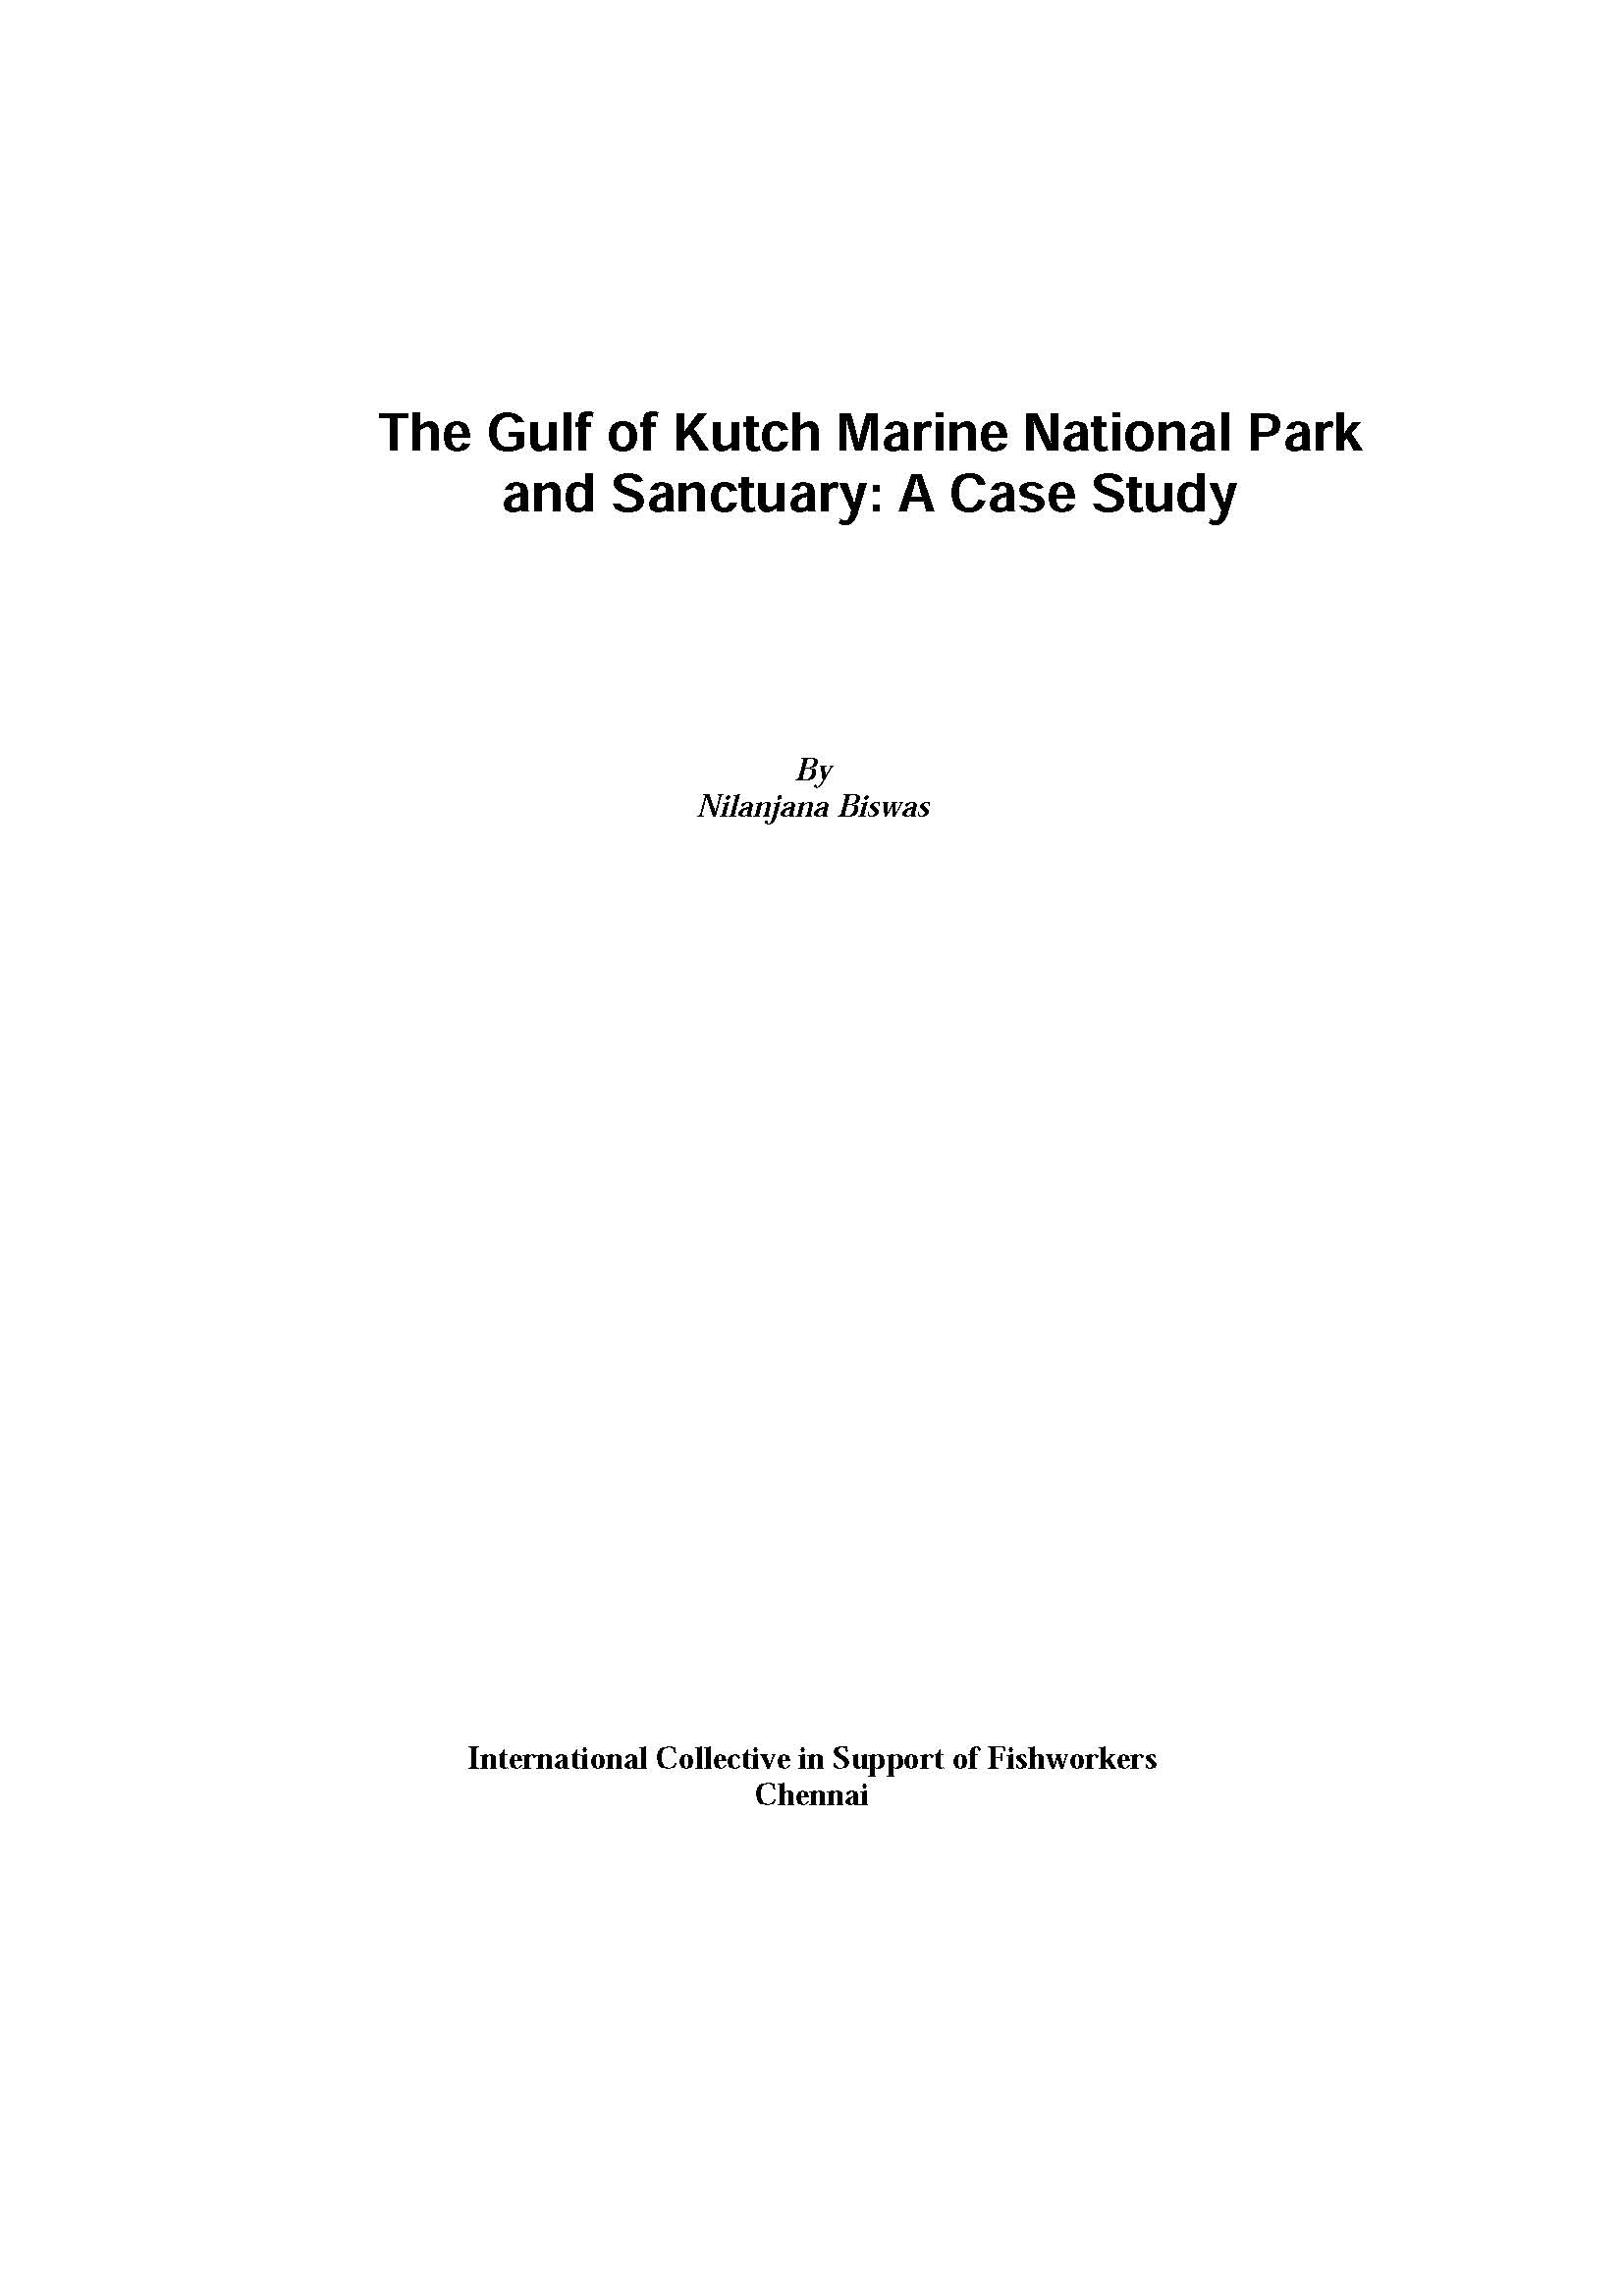 The Gulf of Kutch Marine National Park and Sanctuary: A Case Study